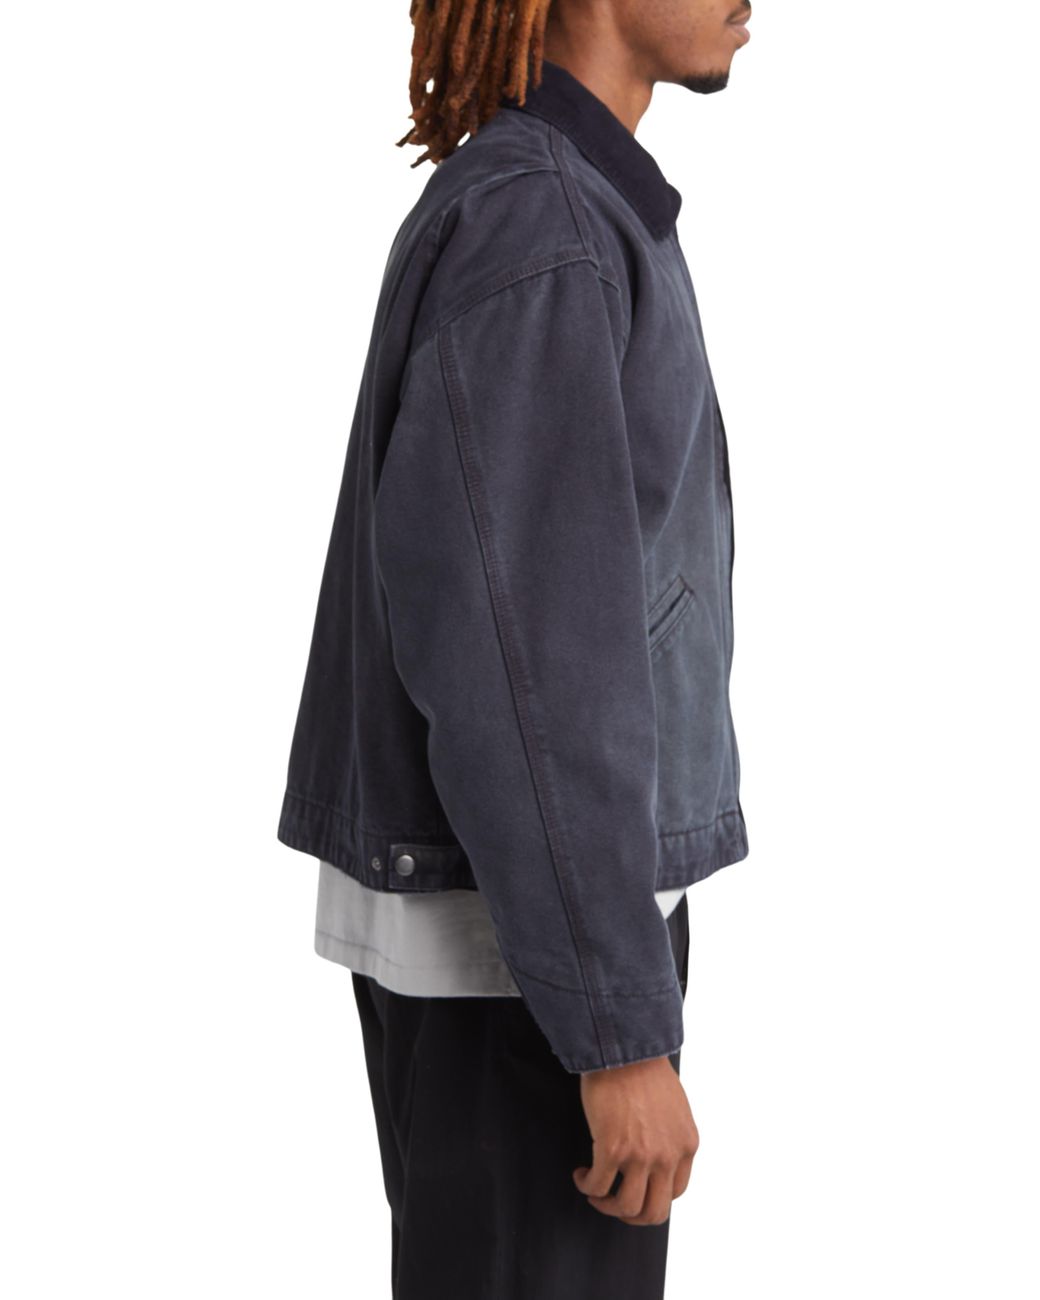 Bobson Japanese X Tom and Jerry Men's Basic Denim Jacket with Back Pri –  Bobson ボブソン